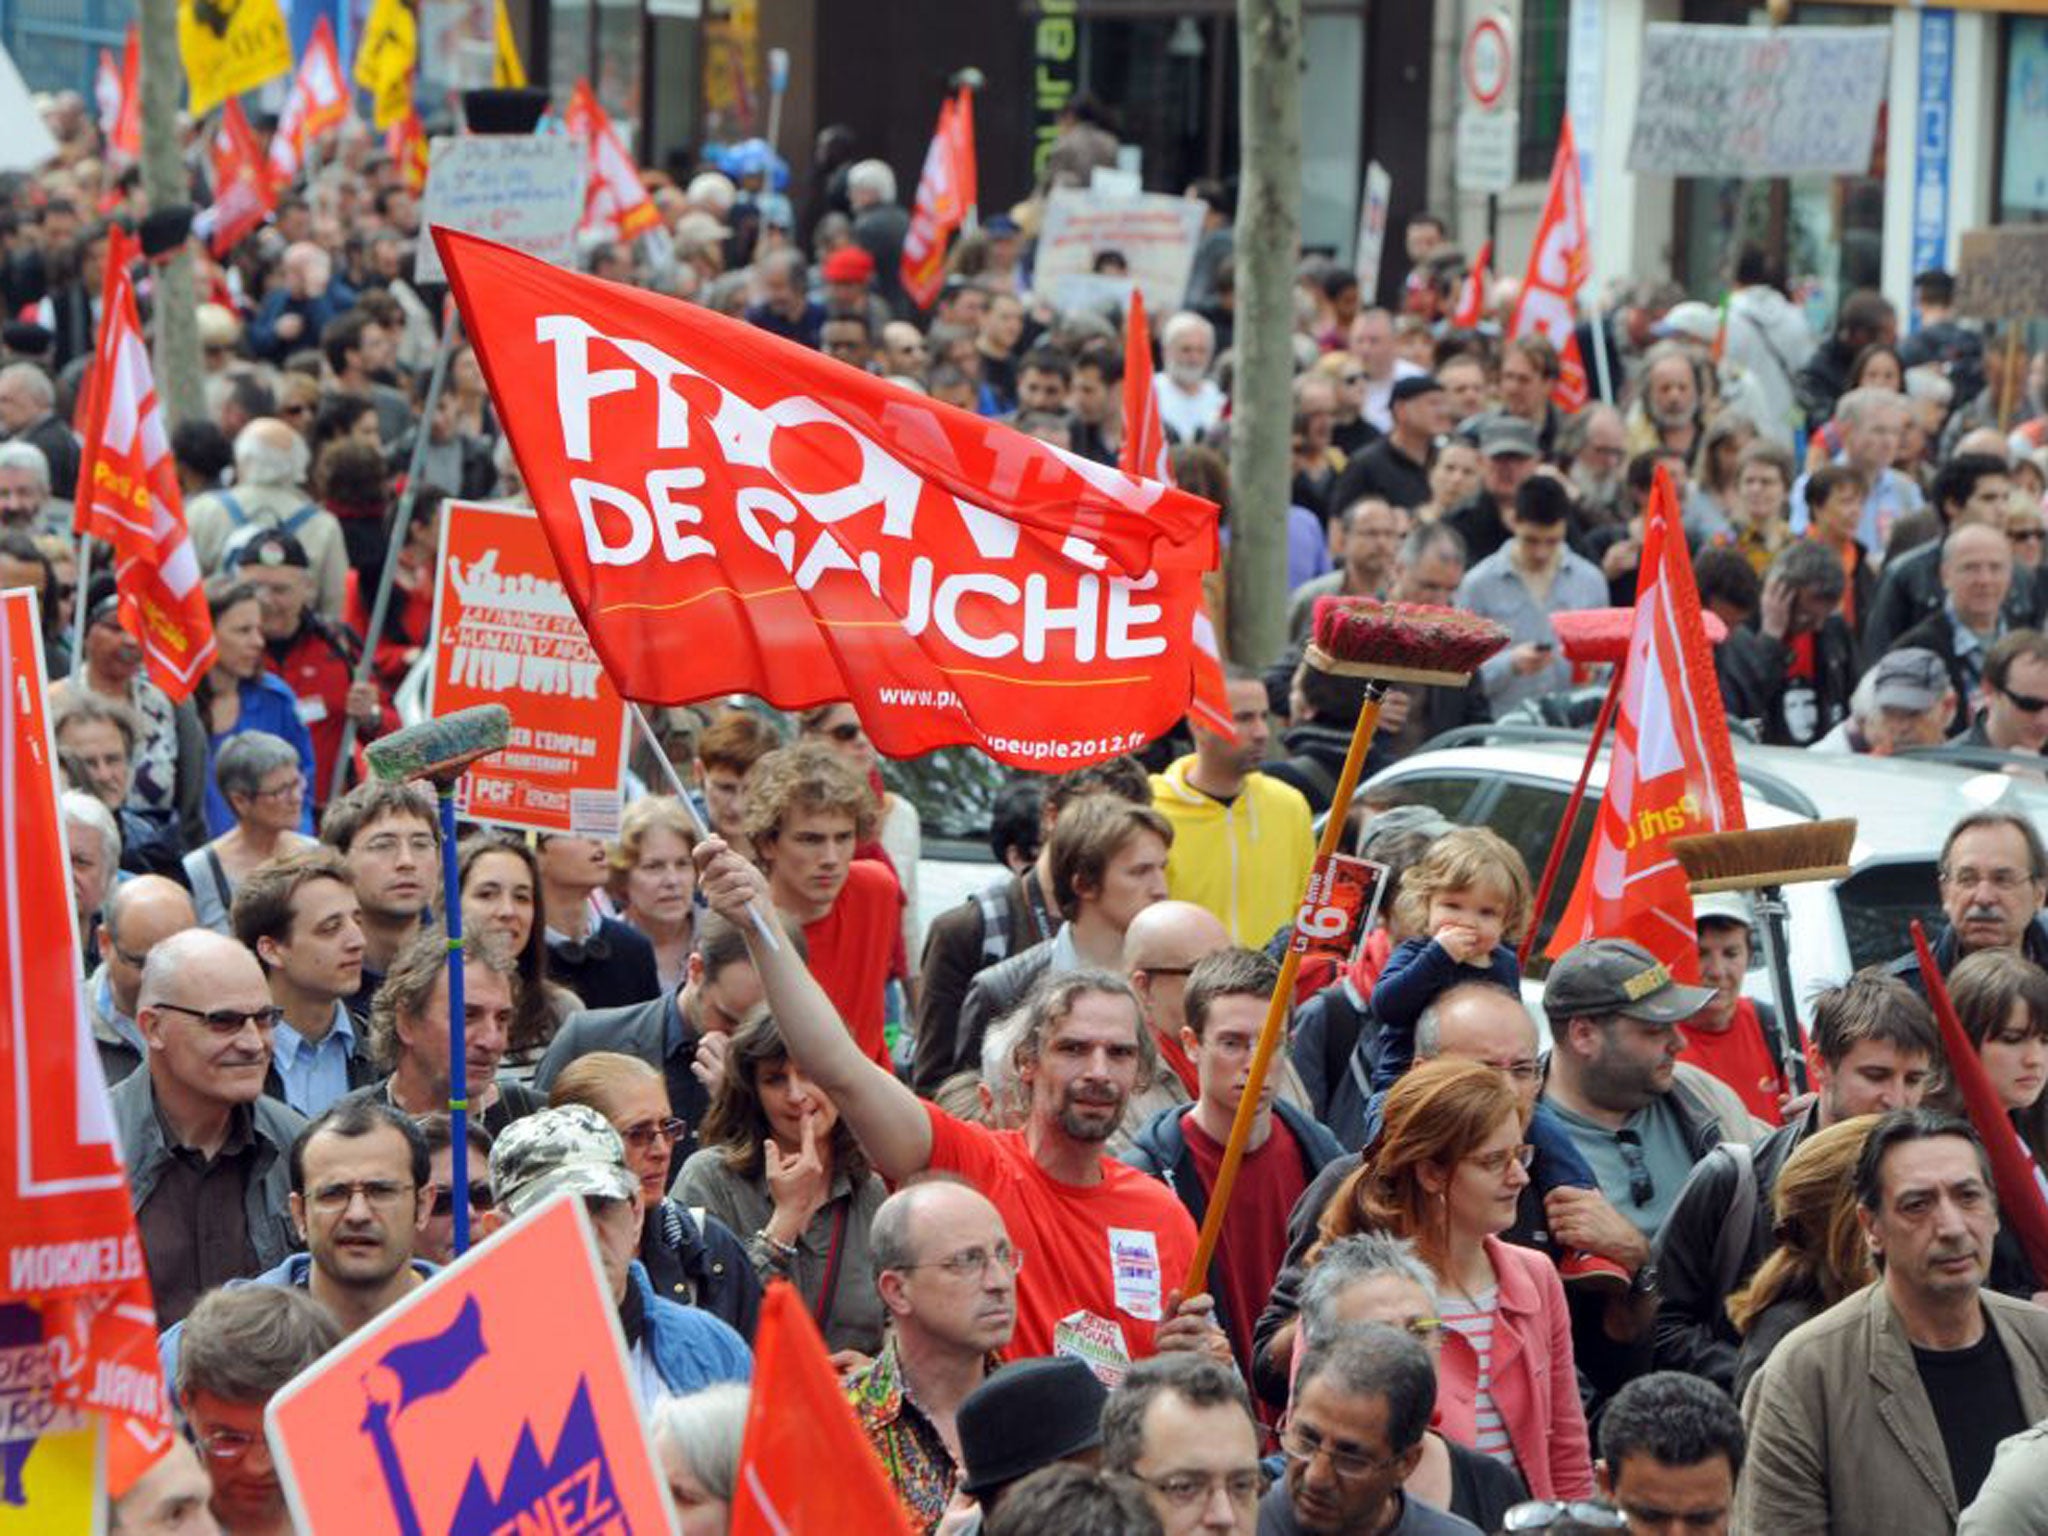 Tens of thousands of supporters of leftist parties marched through central Paris to express disappointment with President Francois Hollande’s first year in power